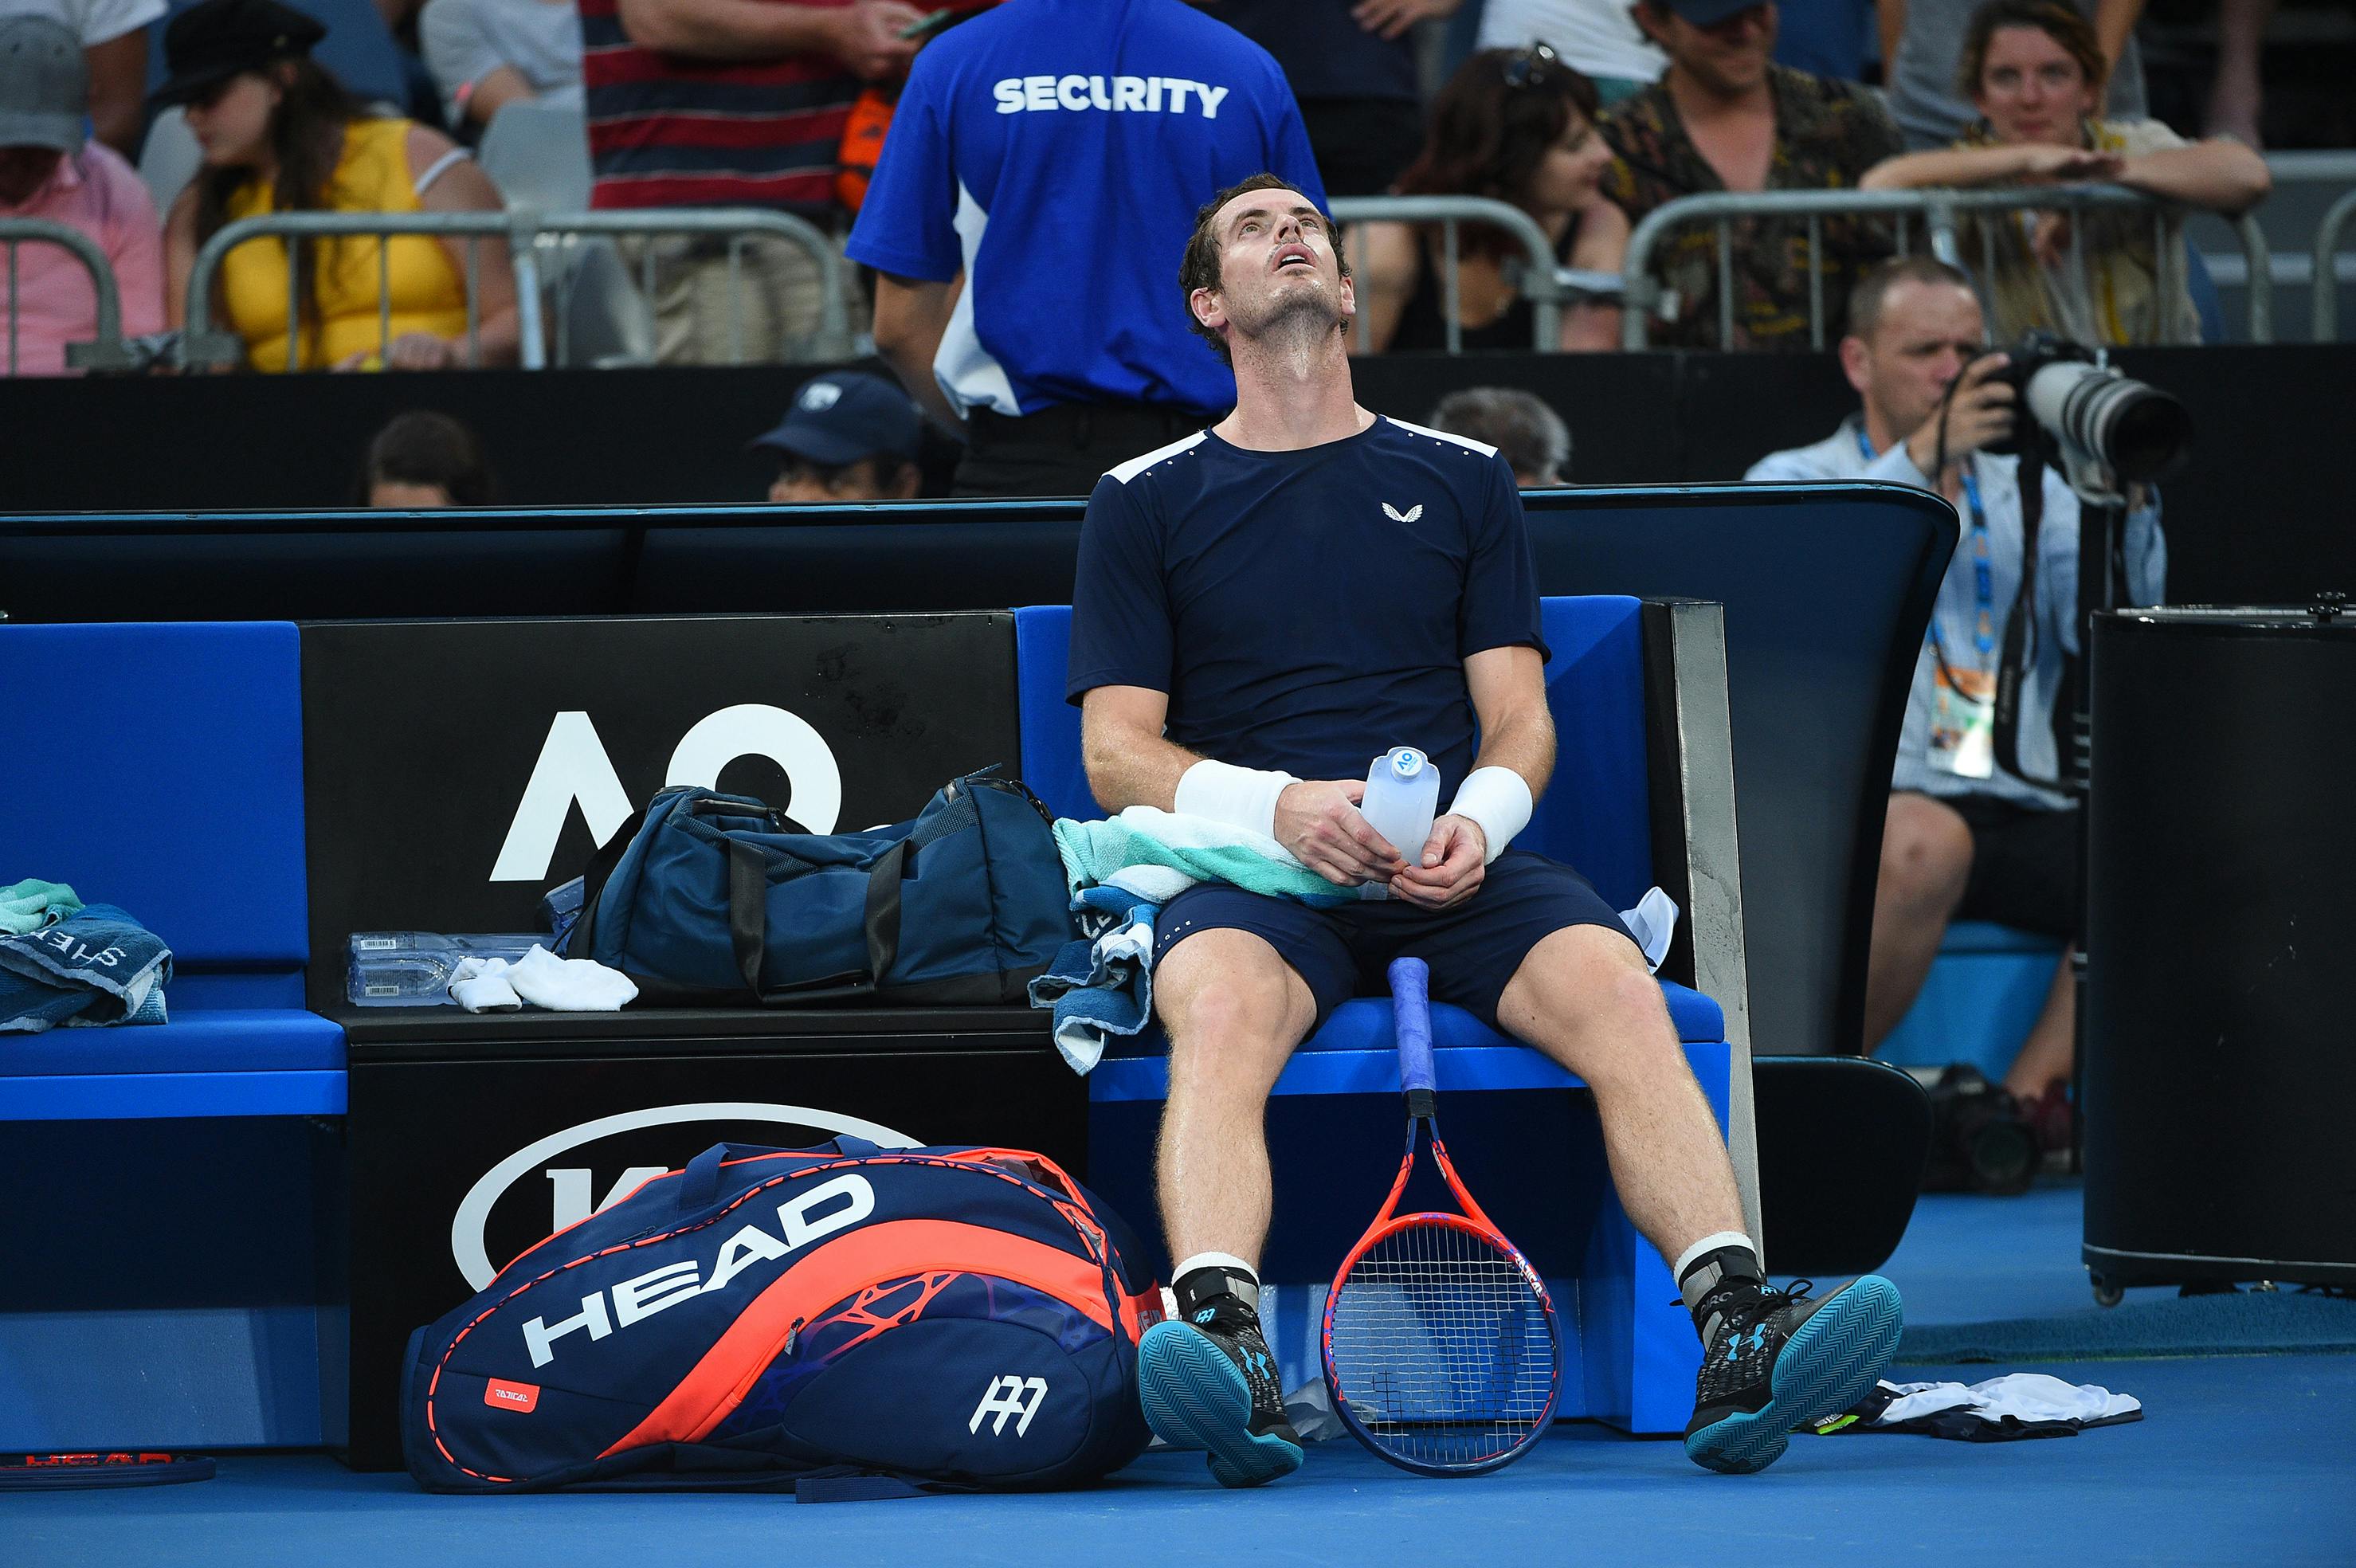 Andy Murray looking at the sky at the Australian Open 2019